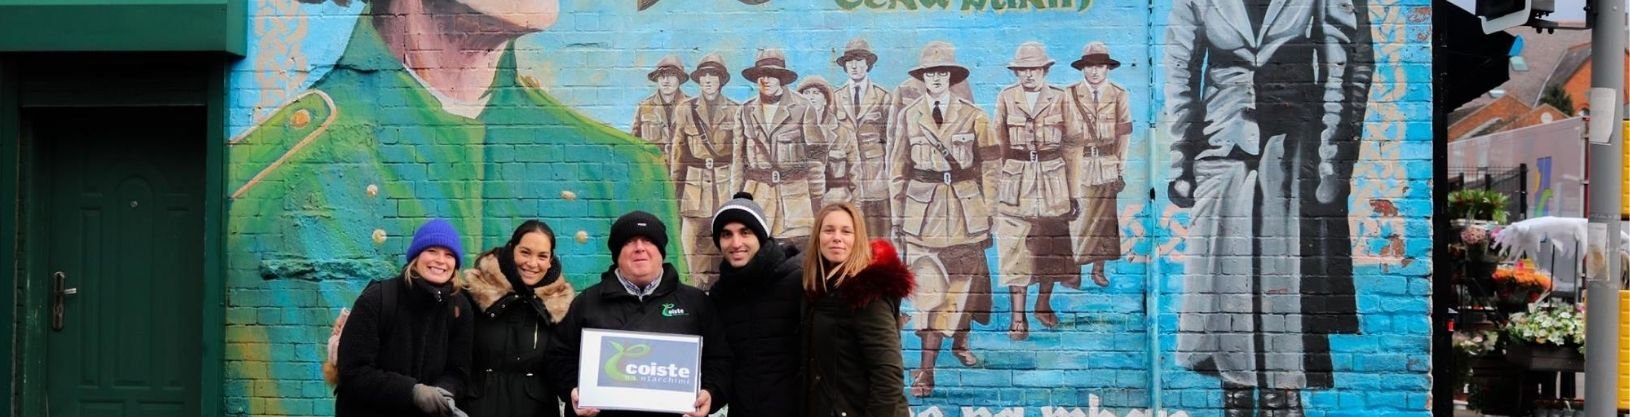 Students with Coiste guide standing in front of political mural in Belfast